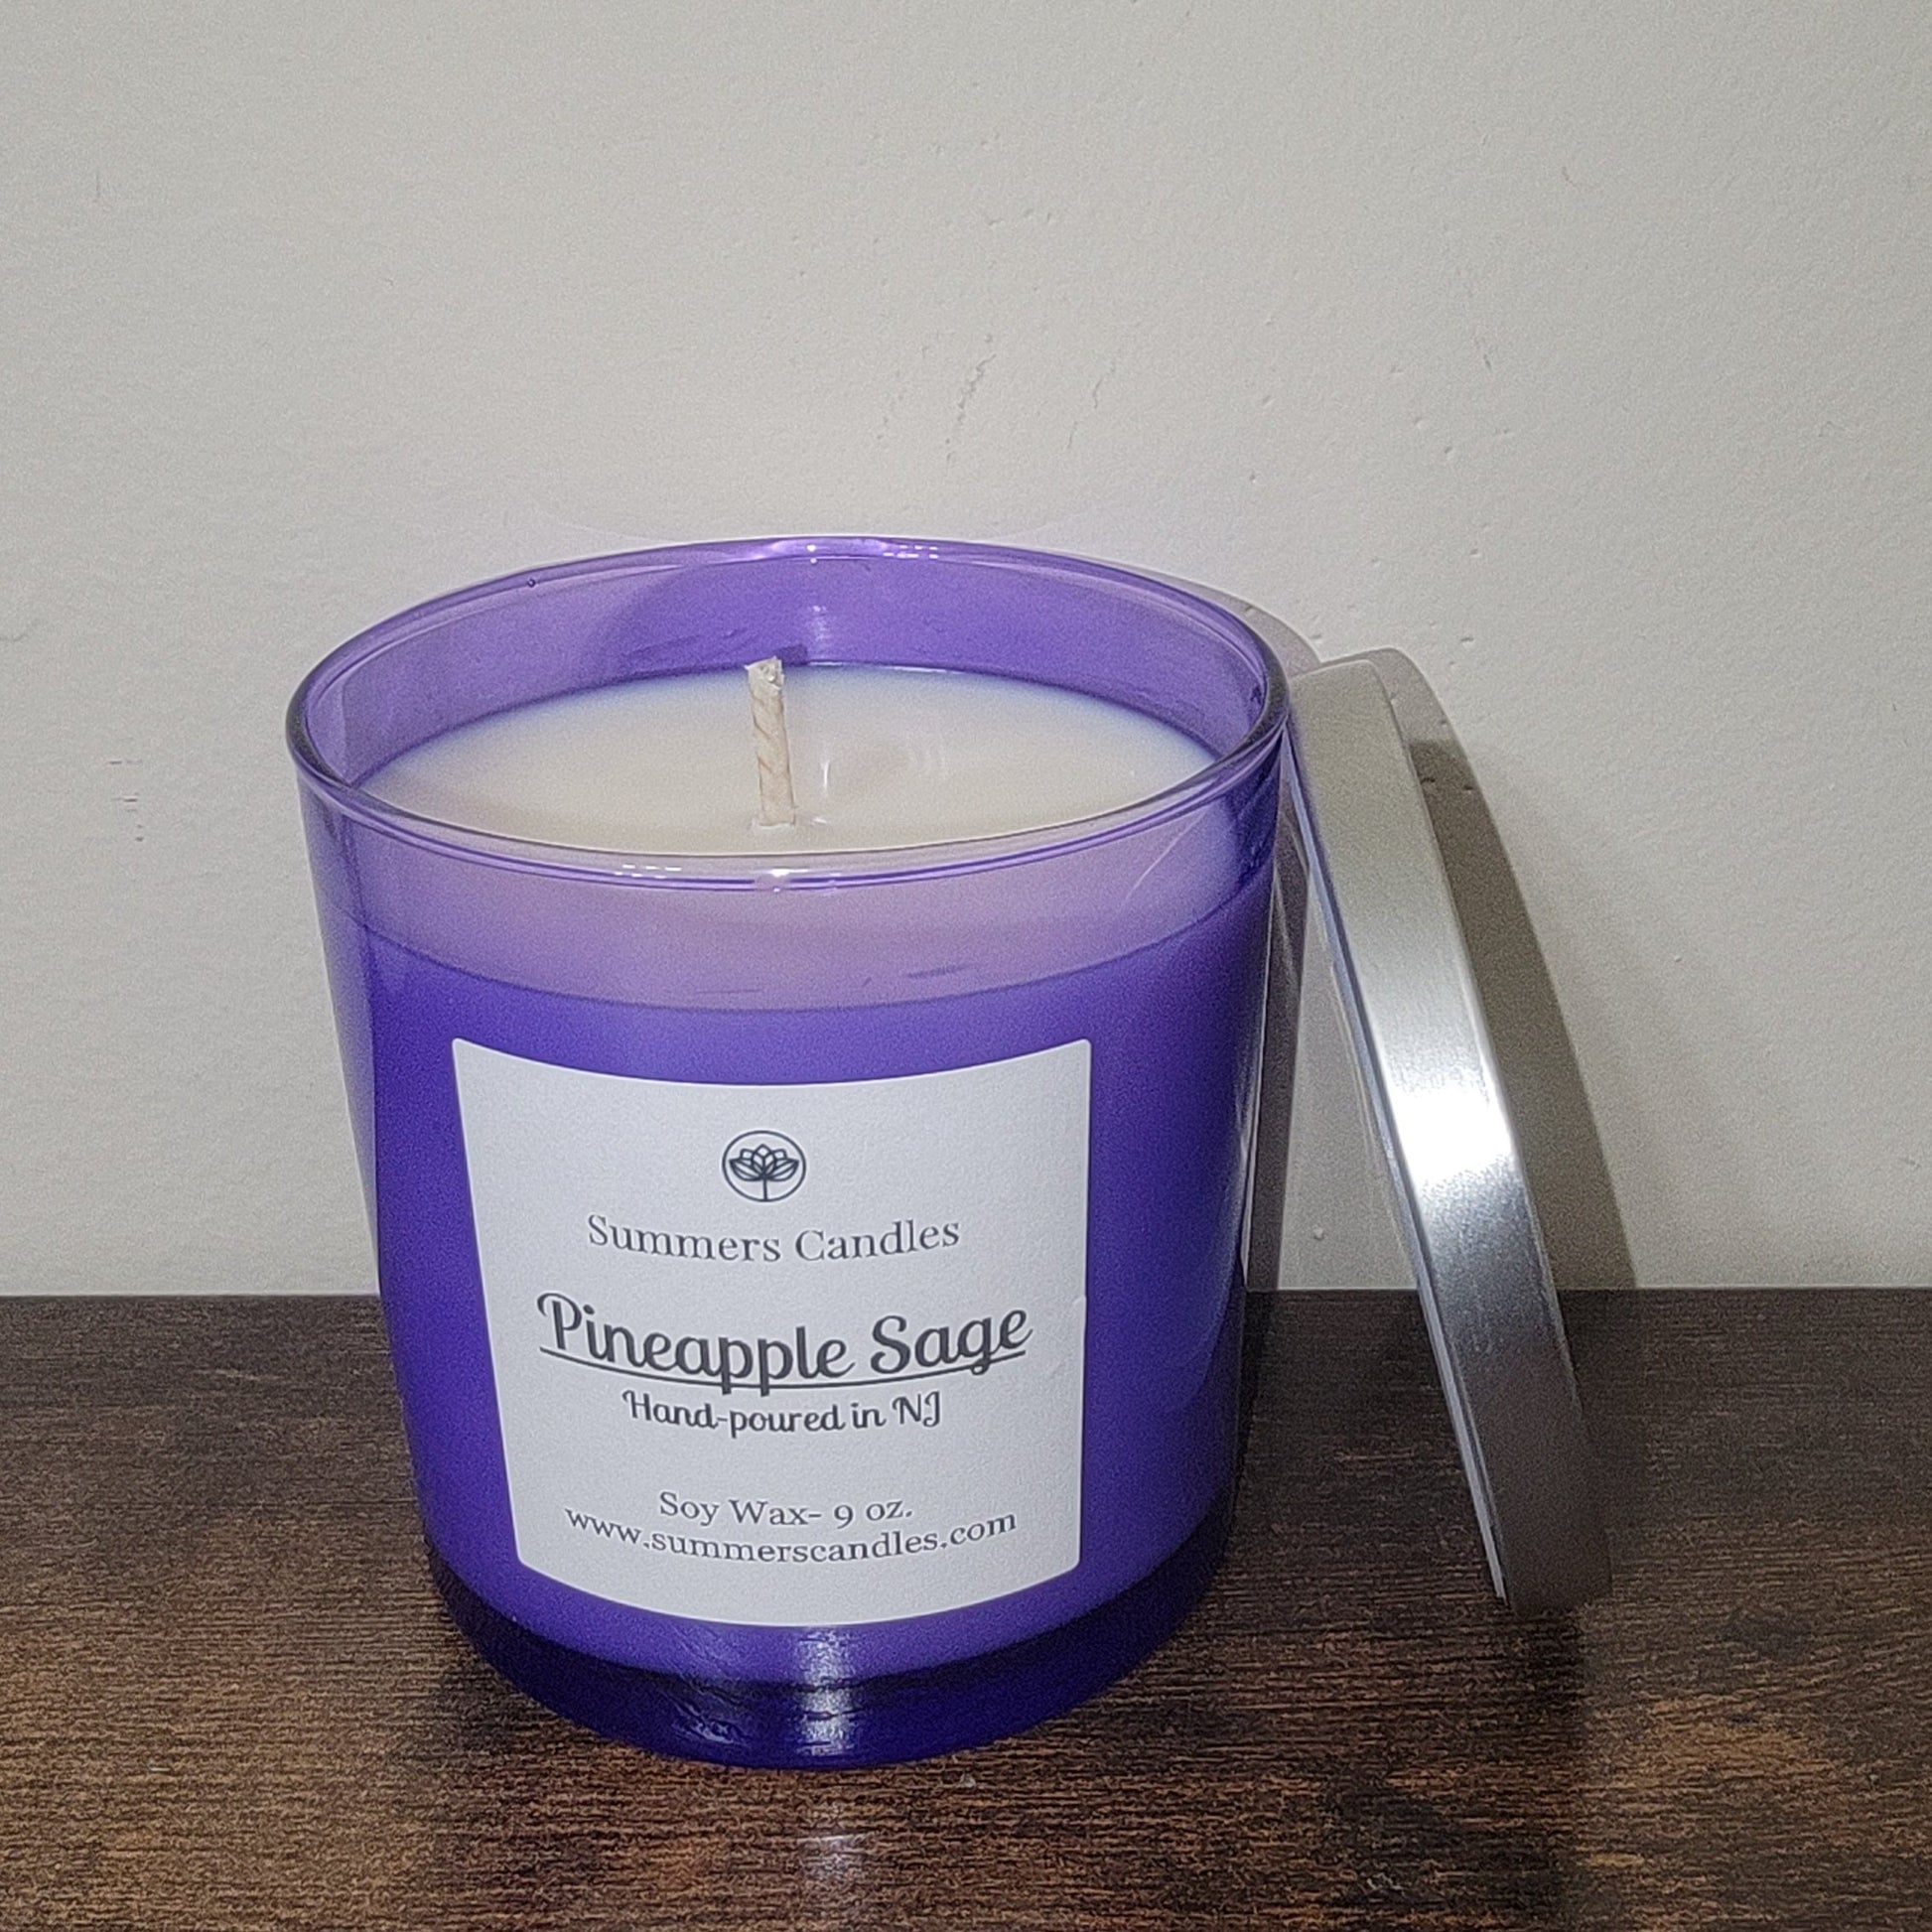 Pineapple Sage Candles